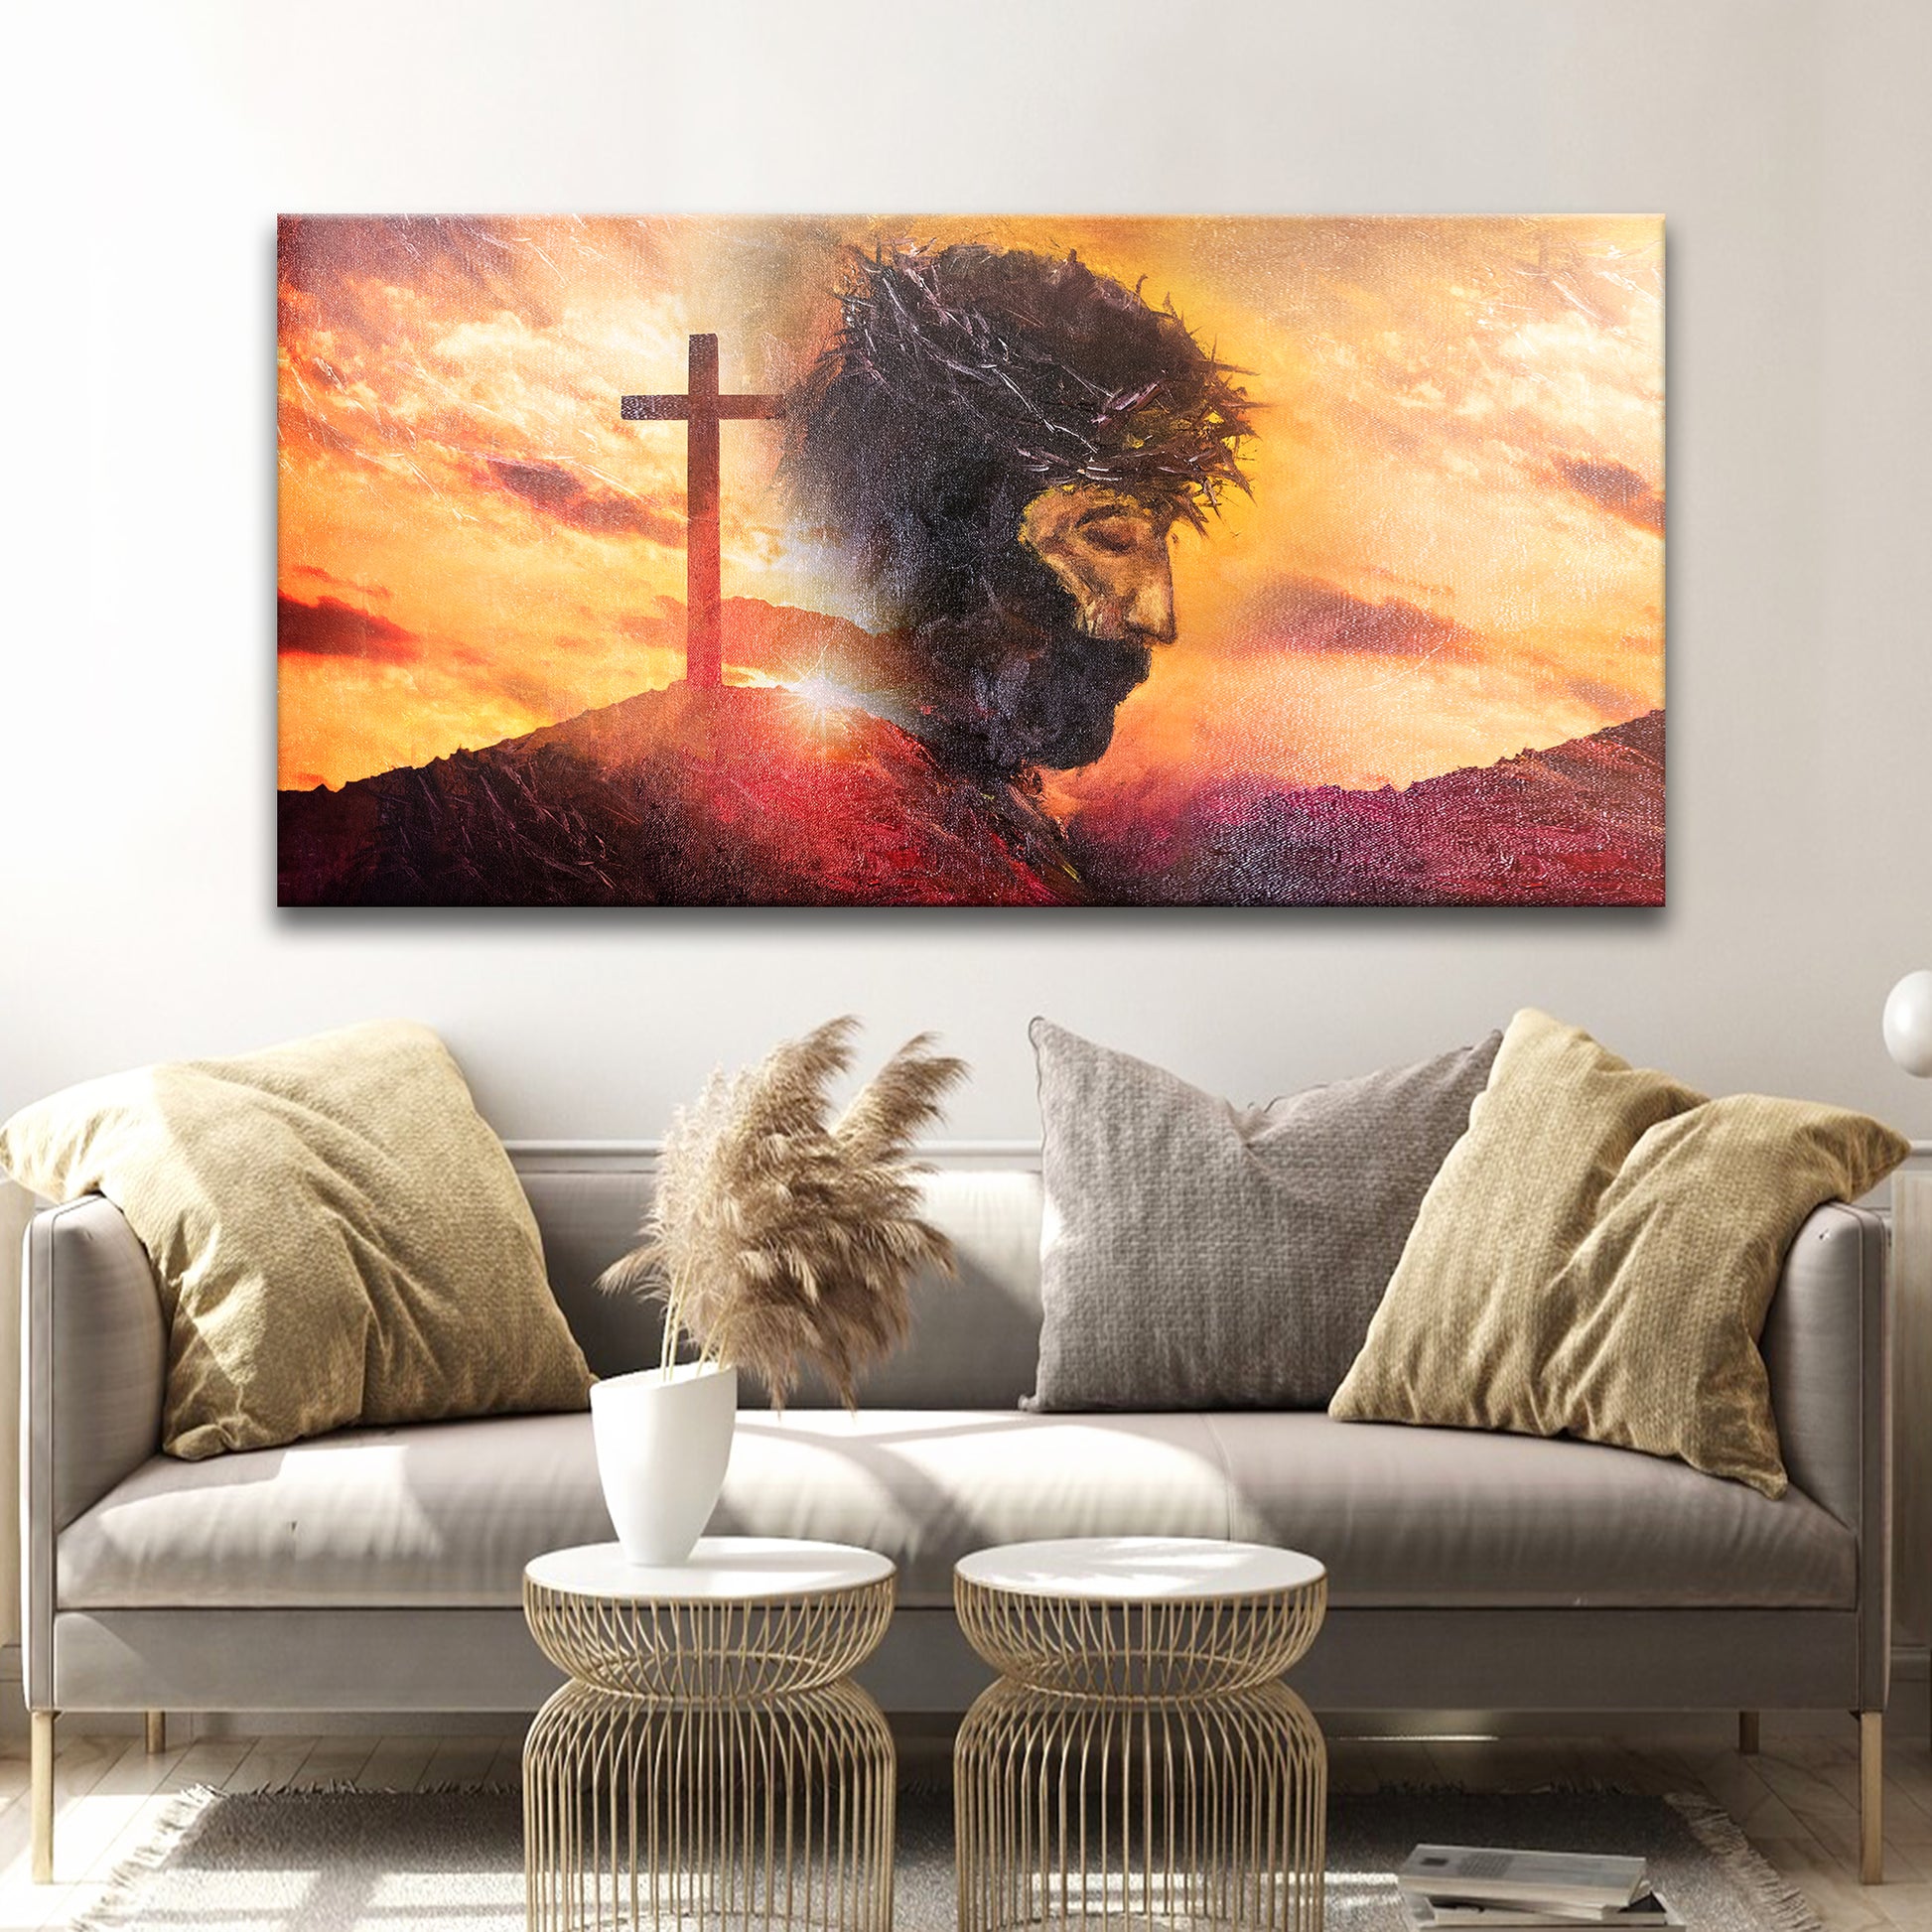 Jesus Christ Crying Canvas Wall Art - Image by Tailored Canvases